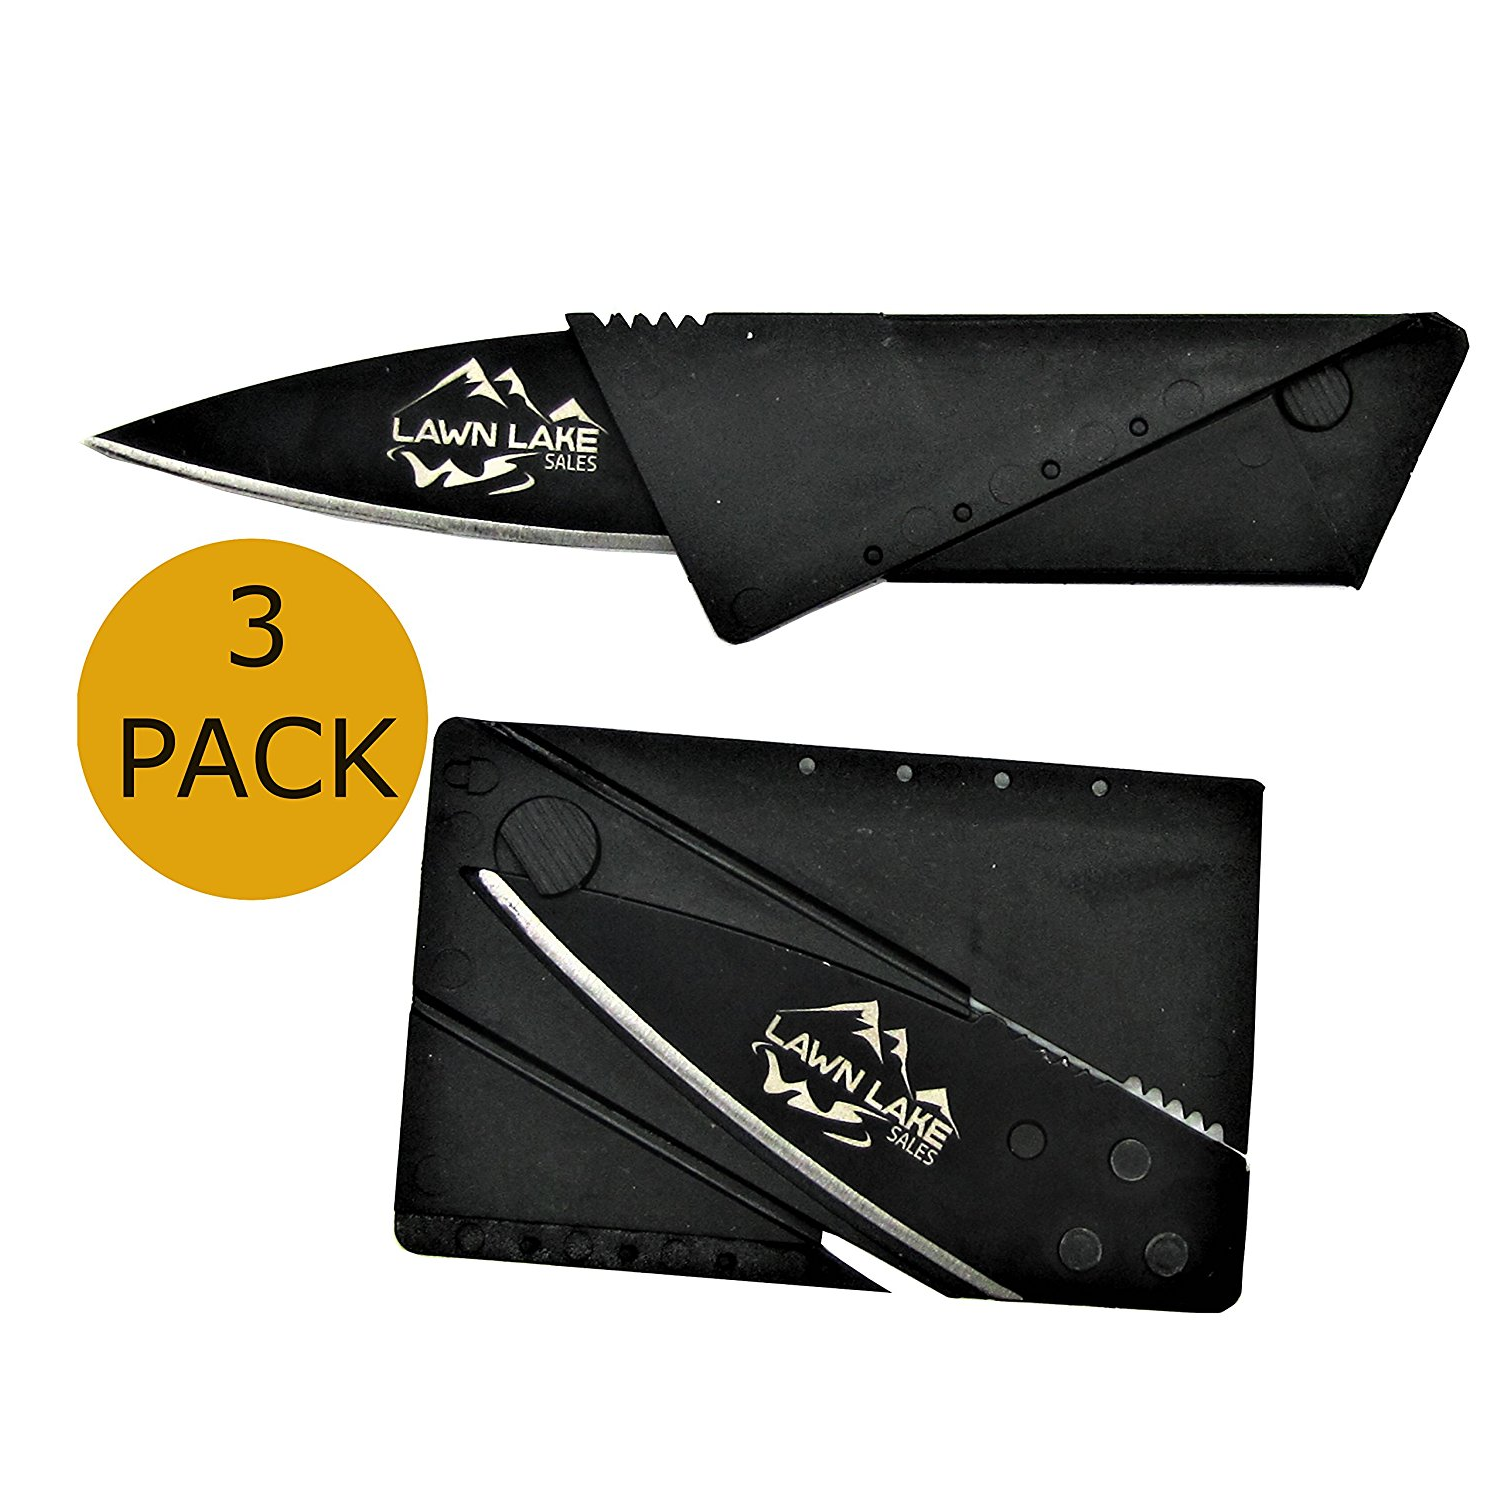 3 Pack Lawn Lake Sales Credit Card Sized Folding Pocket Knife Only $6.29!